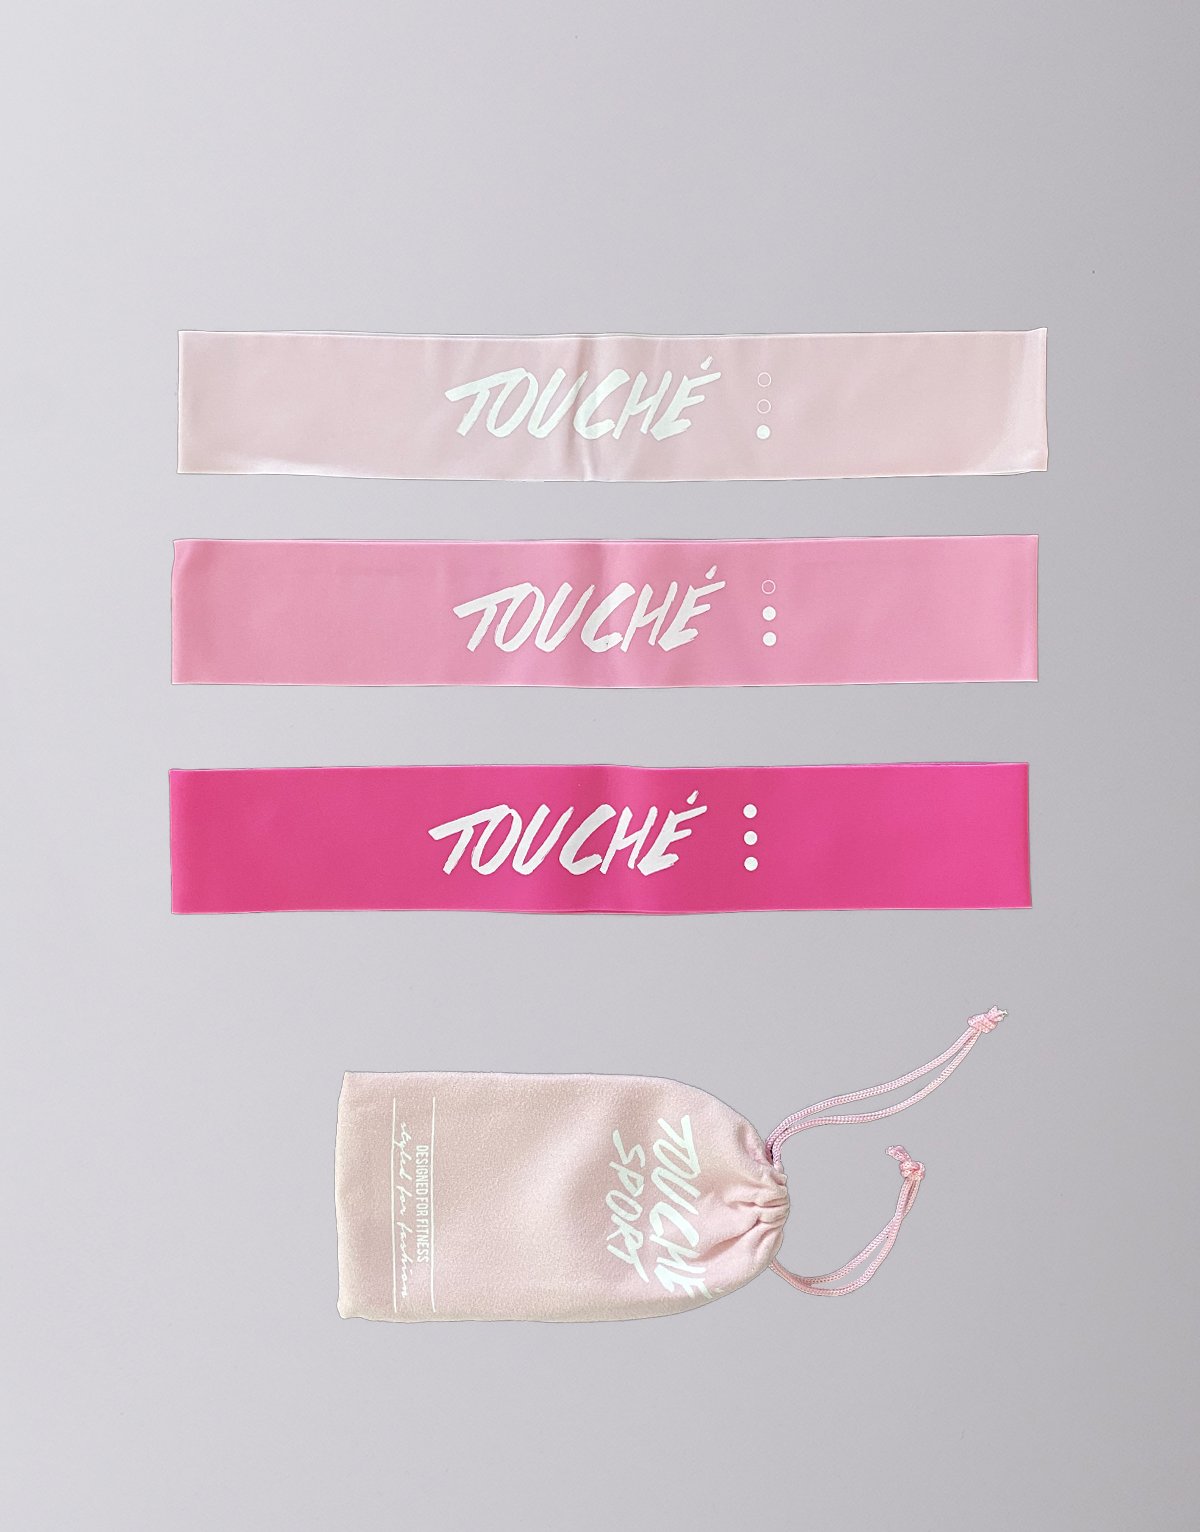 PINK RESISTANCE BAND